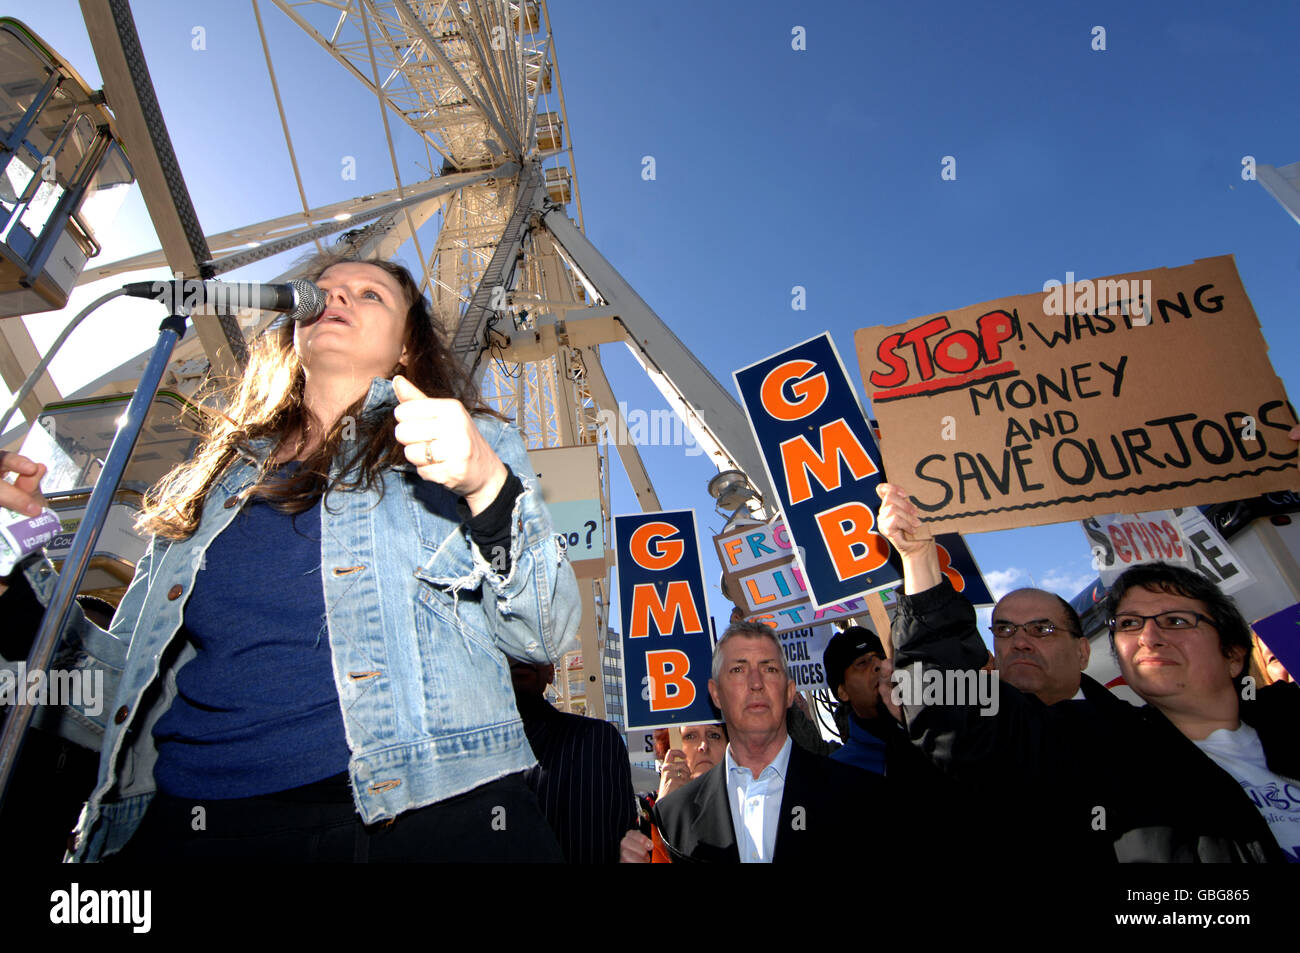 Actress Samantha Morton speaks at a demonstration against Nottingham City Council budget cuts in the Old Market Square, Nottingham. Stock Photo